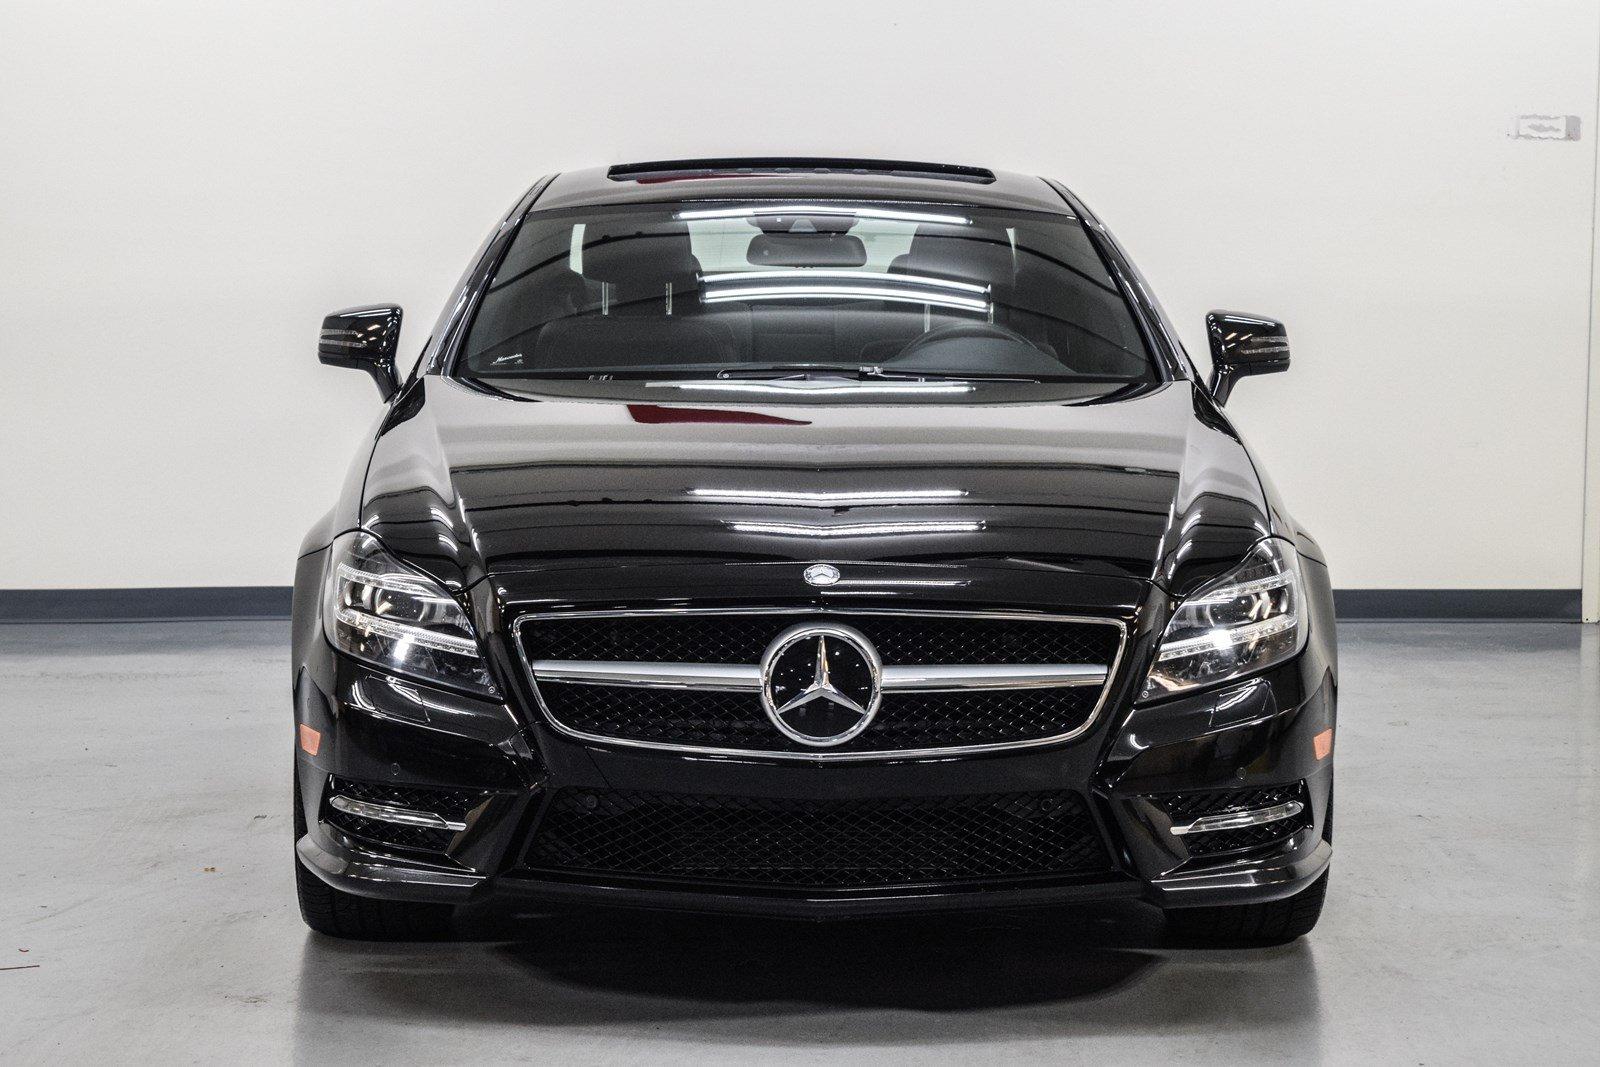 Used 2013 Mercedes-Benz CLS-Class CLS550 for sale Sold at Gravity Autos Marietta in Marietta GA 30060 3